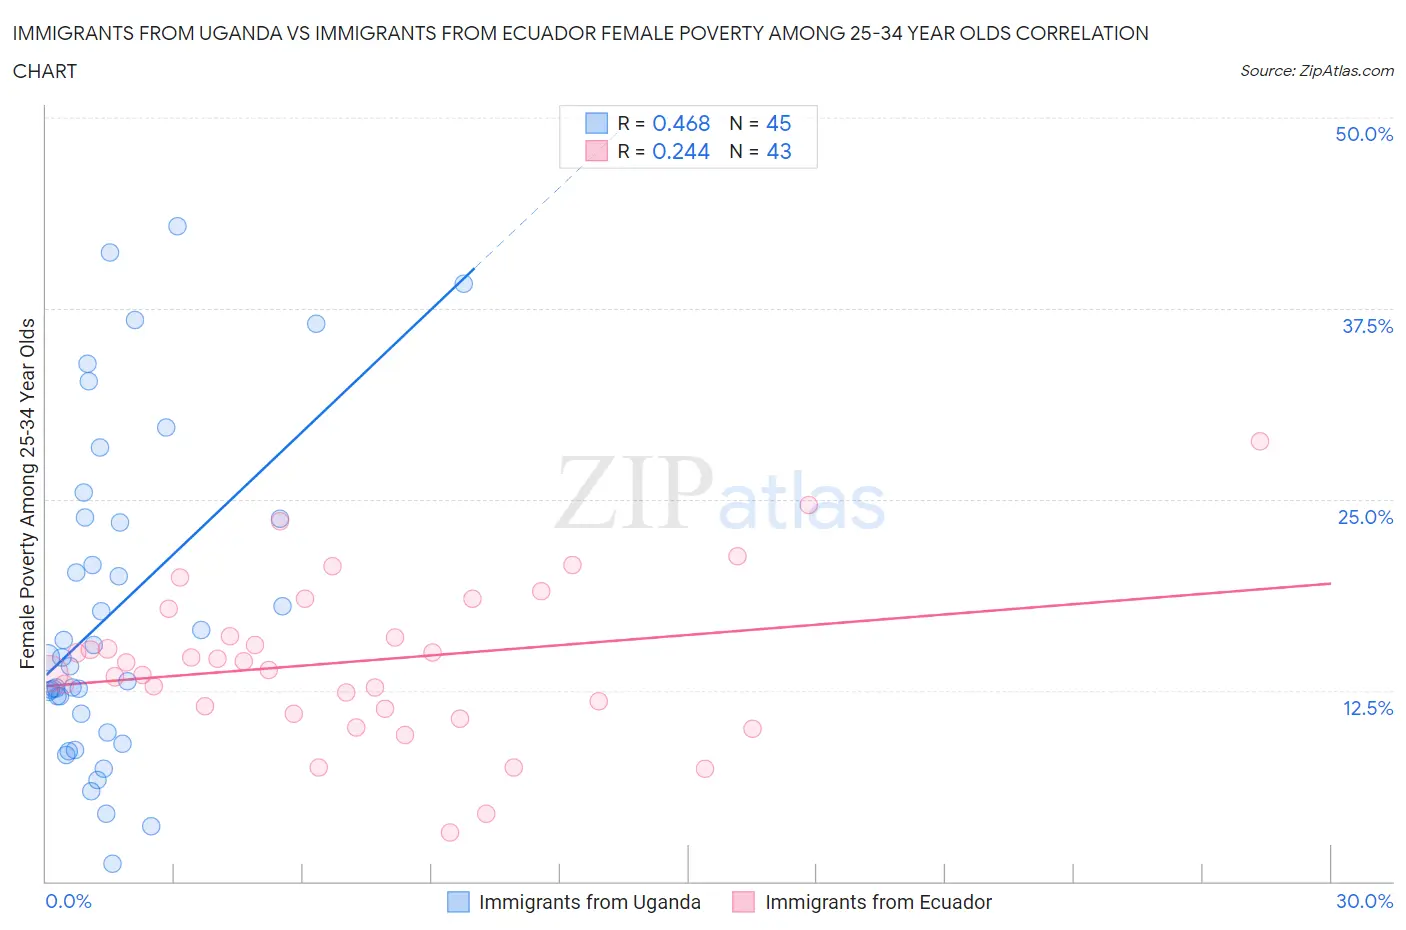 Immigrants from Uganda vs Immigrants from Ecuador Female Poverty Among 25-34 Year Olds